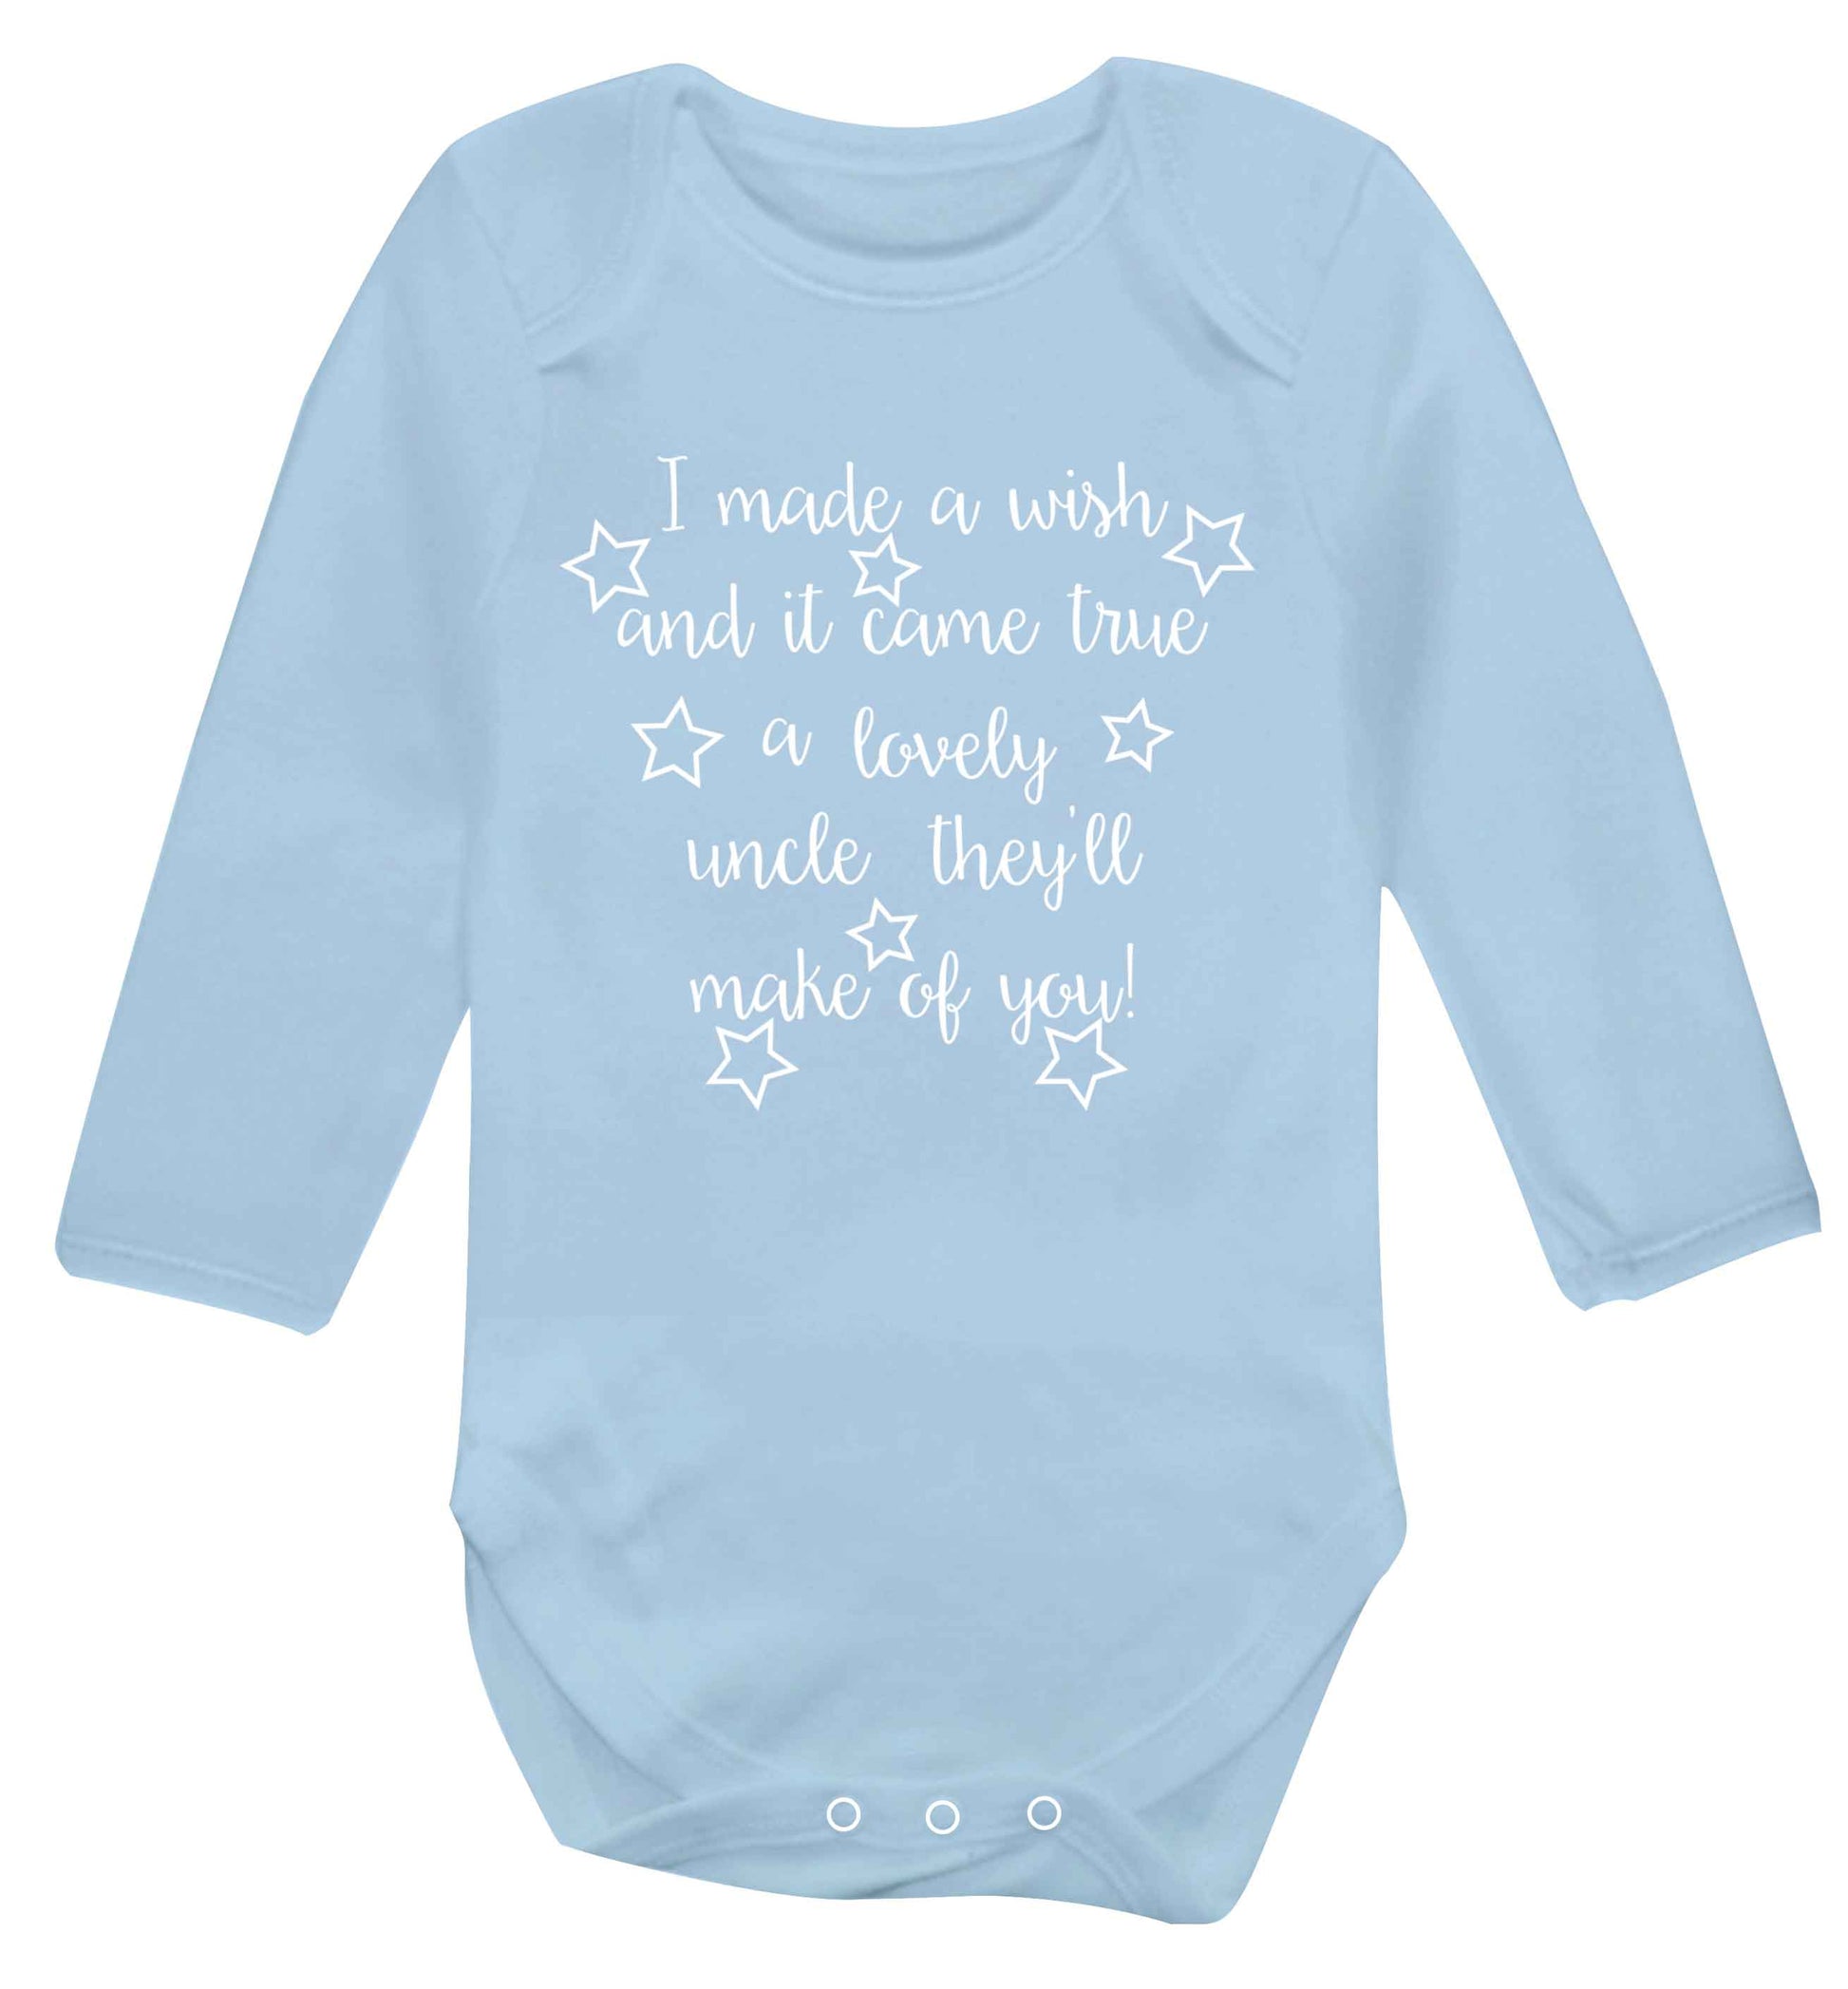 I made a wish and it came true a lovely uncle they'll make of you! Baby Vest long sleeved pale blue 6-12 months